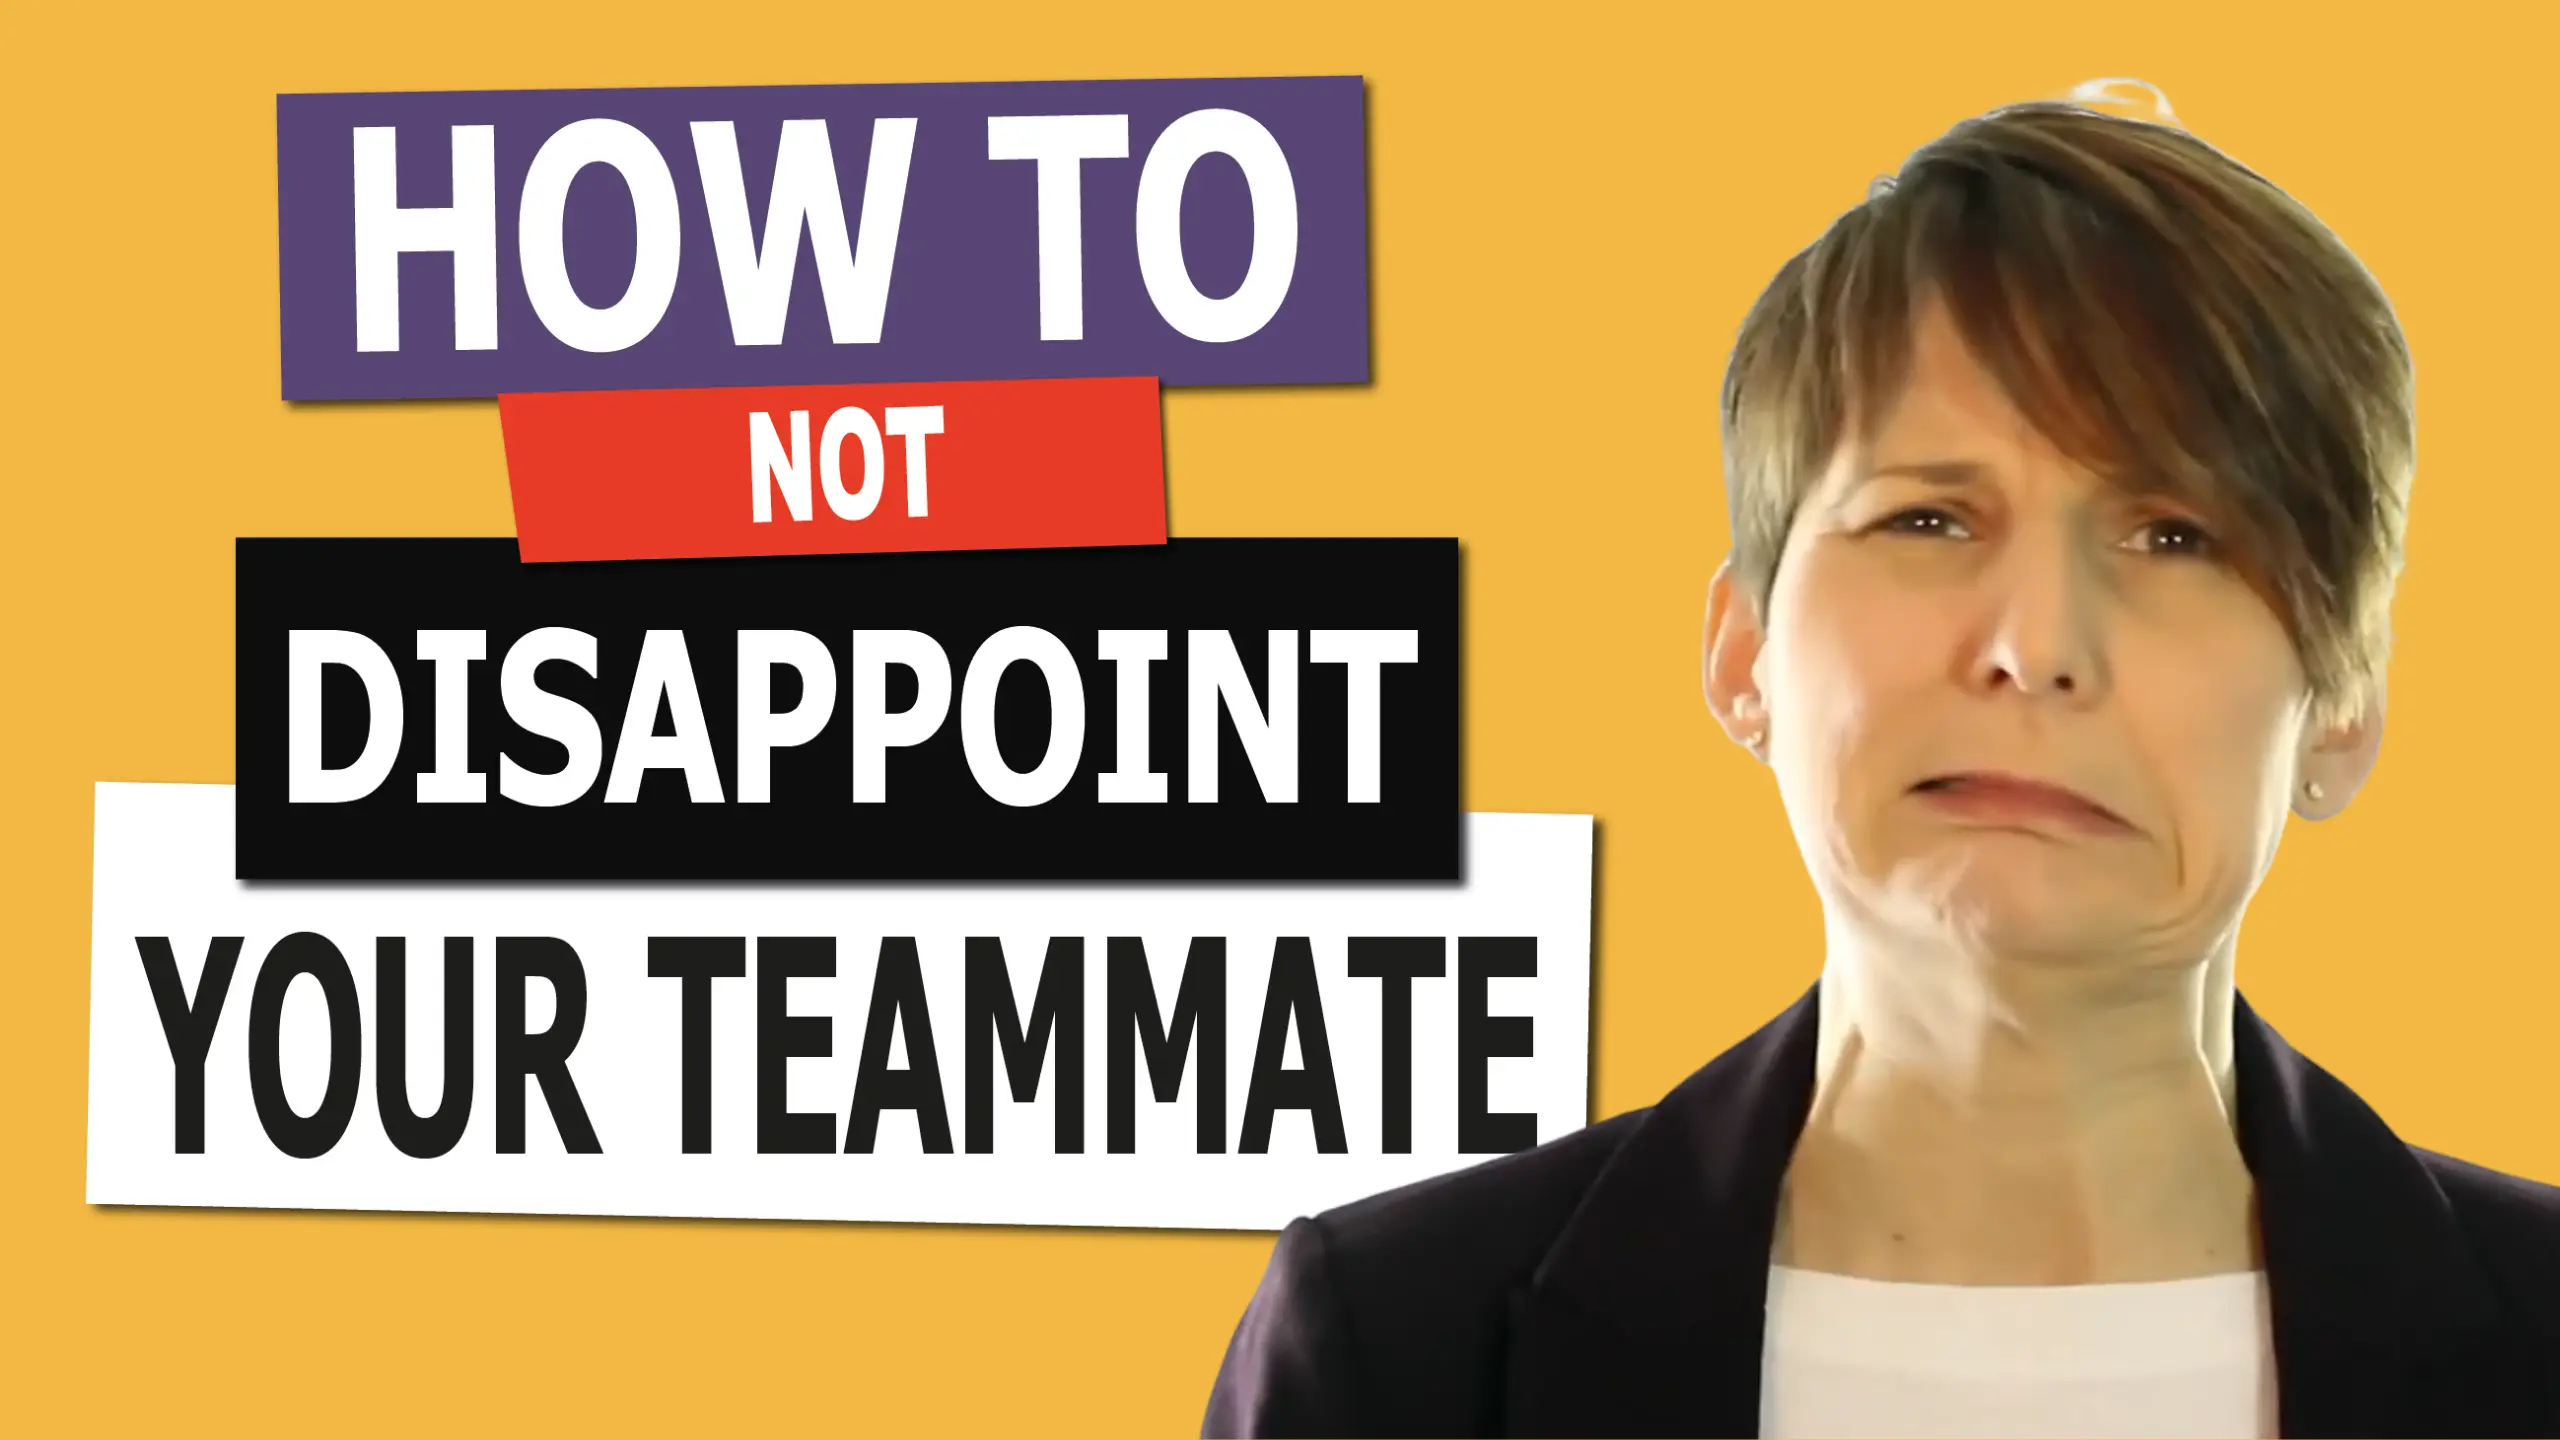 How To Not Disappoint Your Teammate